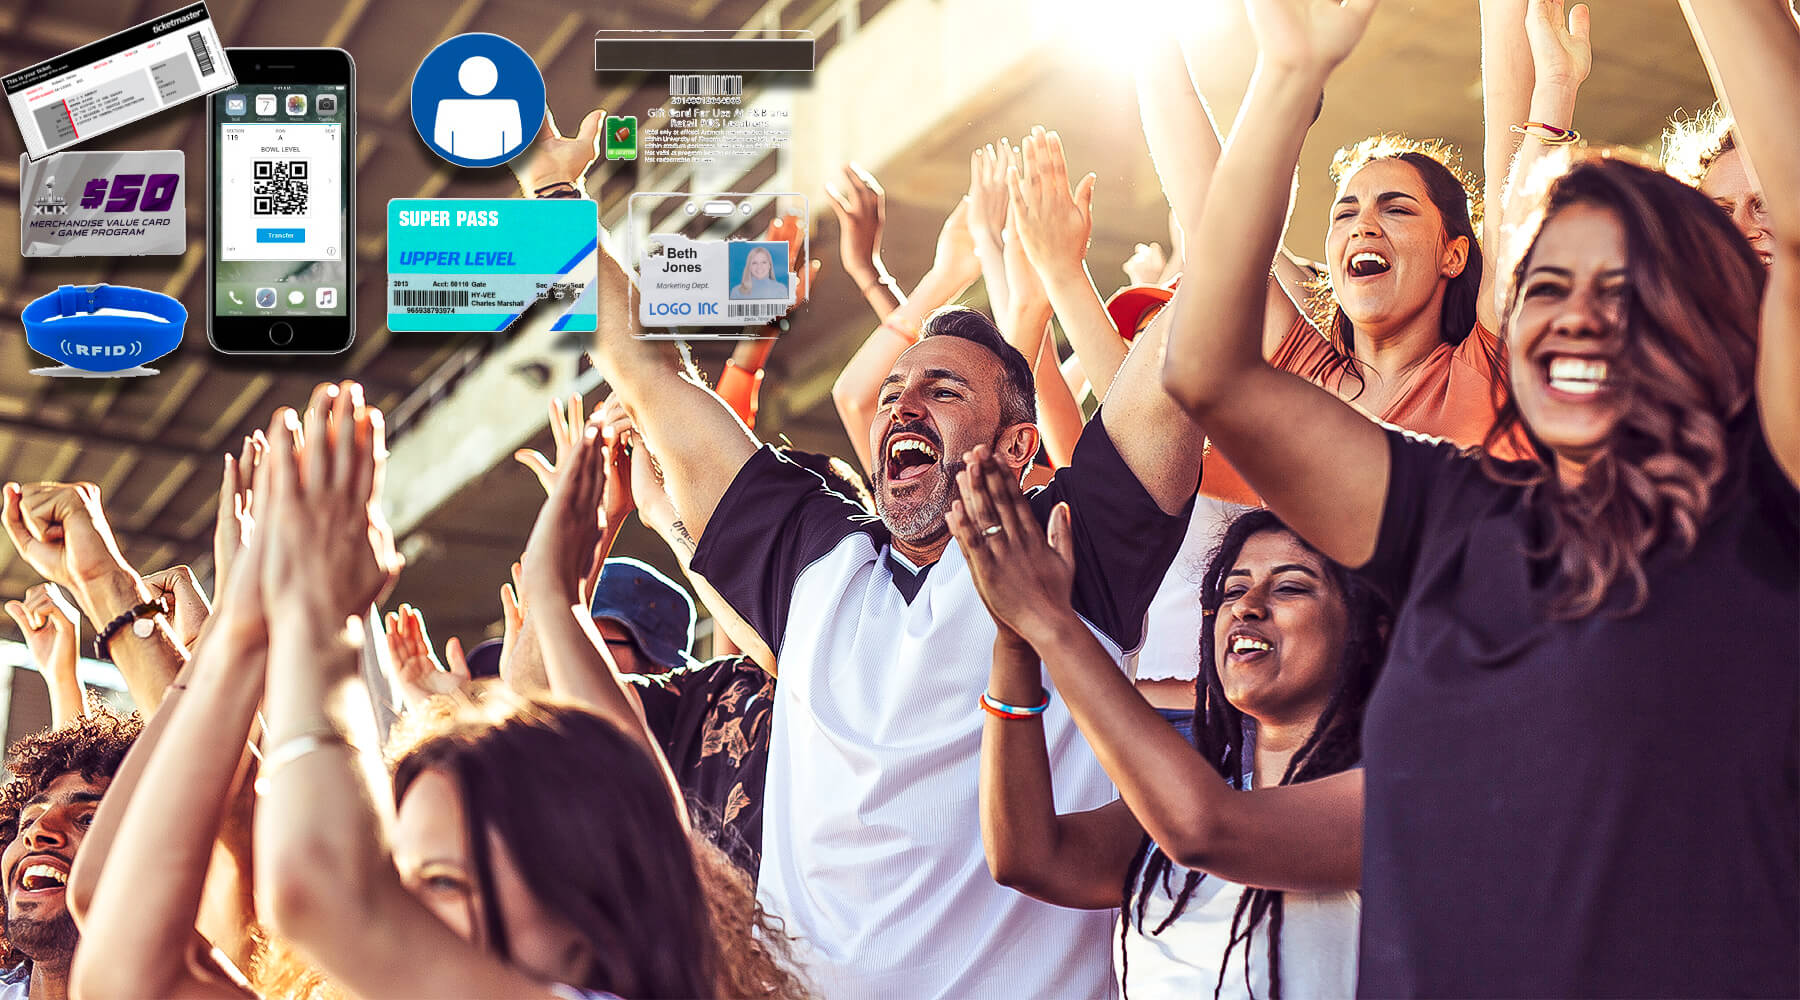 STADIS rewards provides a unique way to engage fans and launch individual marketing cmapaigns (1)